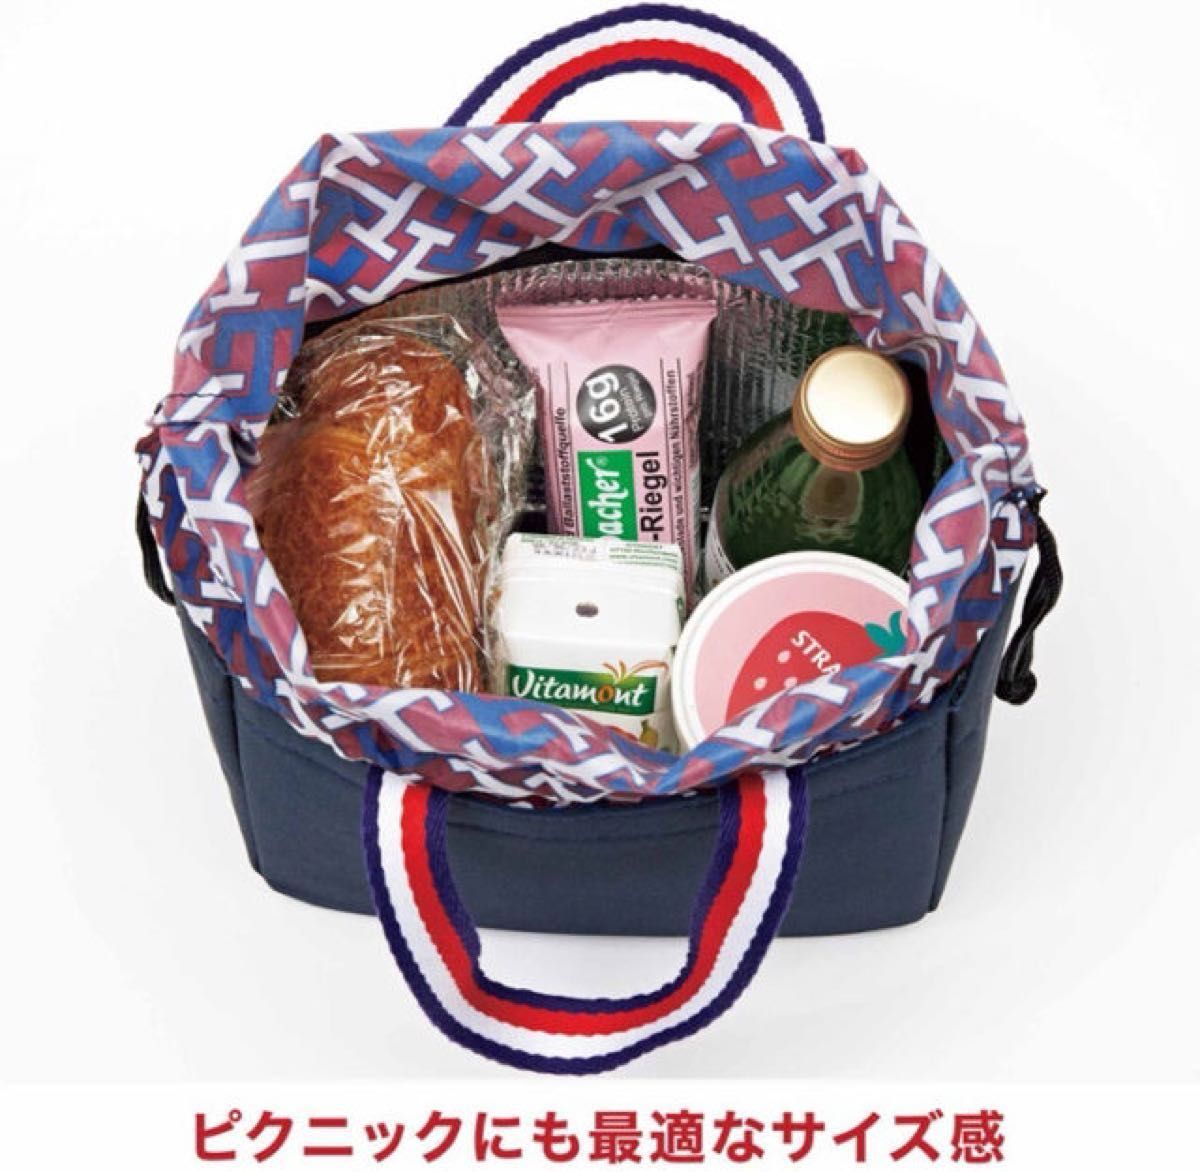 TOMMY HILFIGER トミー ヒルフィガー 保冷保温機能つきランチバッグ 付録